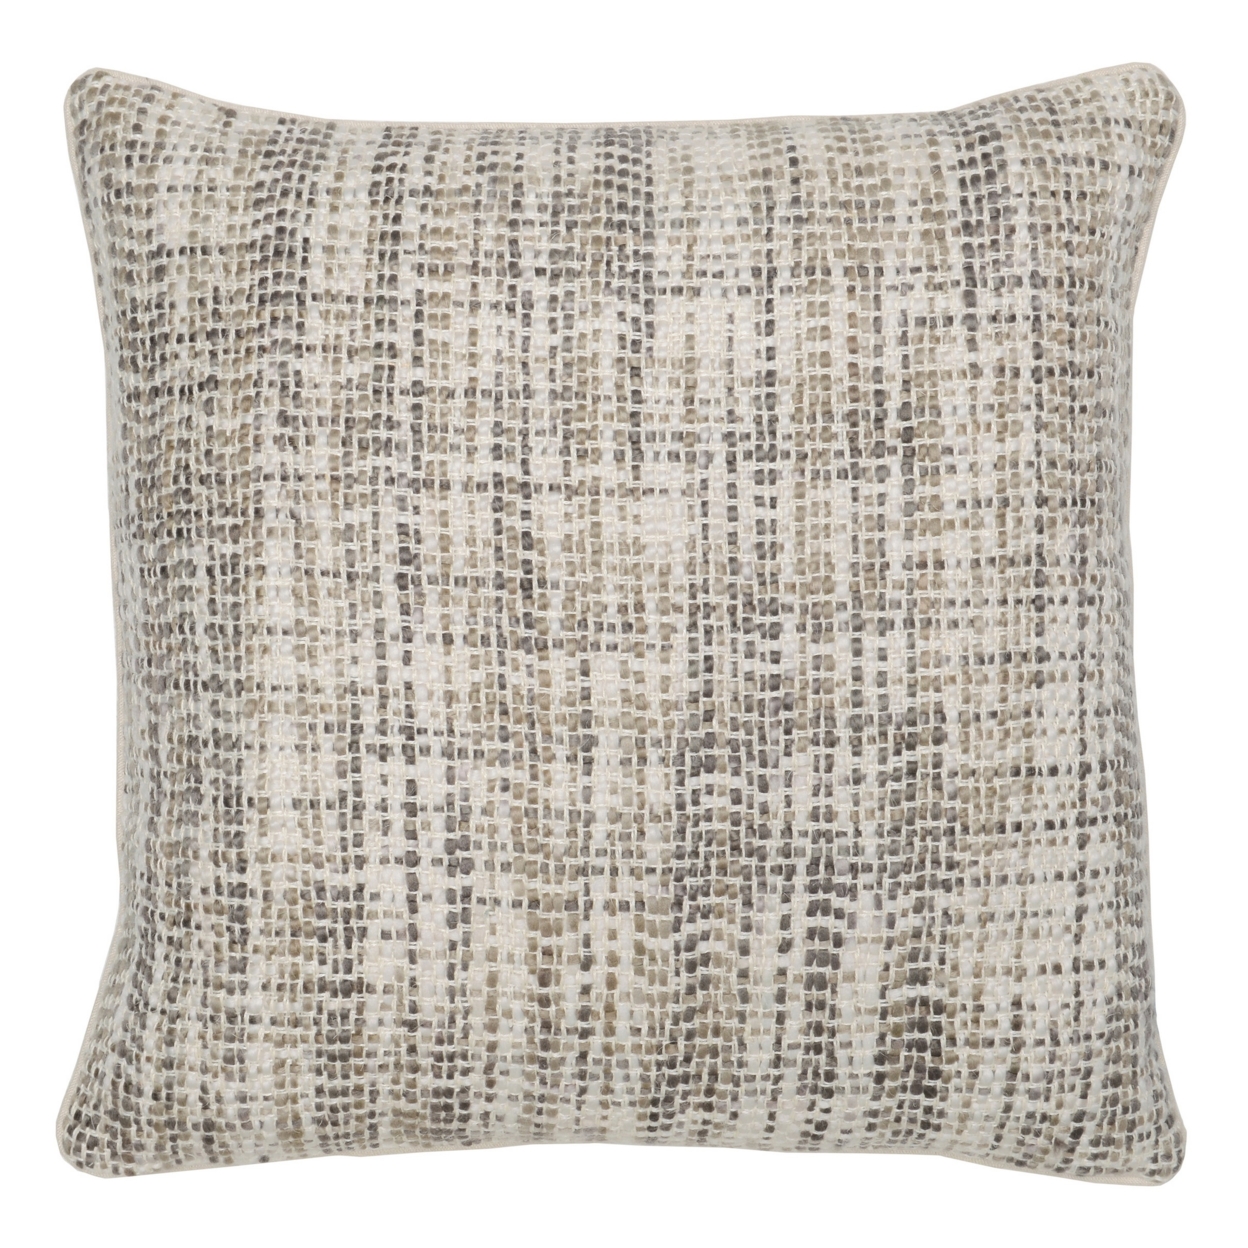 Square Fabric Throw Pillow With Hand Woven Pattern, White And Gray- Saltoro Sherpi